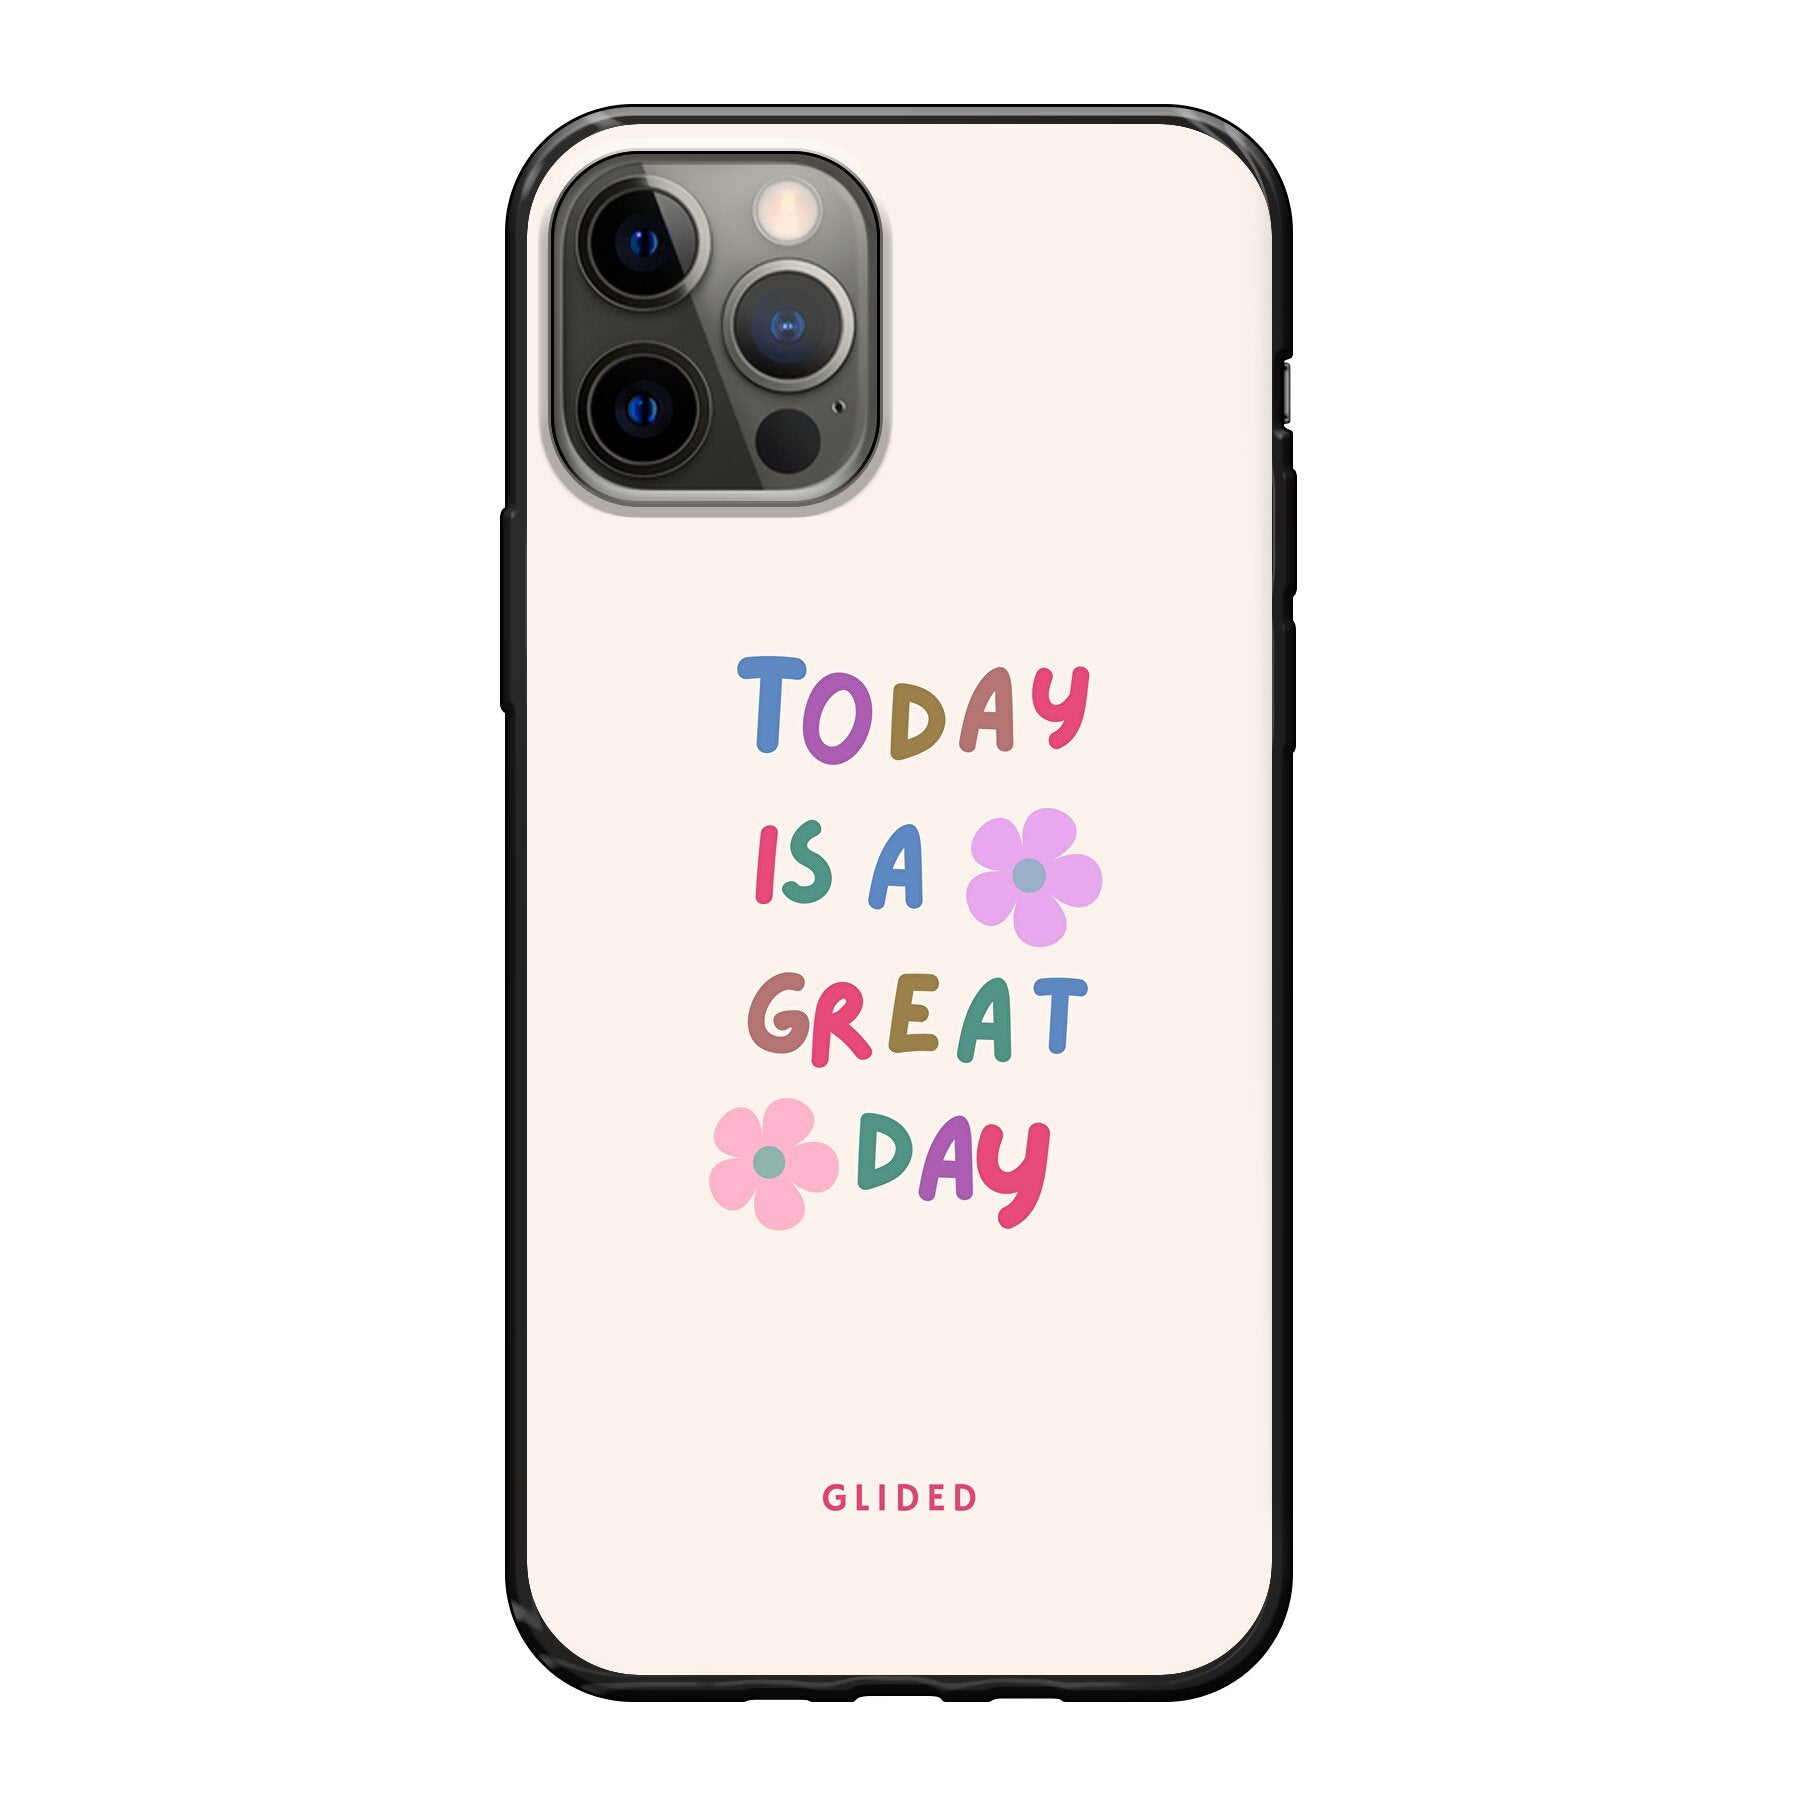 Great Day - iPhone 12 Handyhülle Soft case